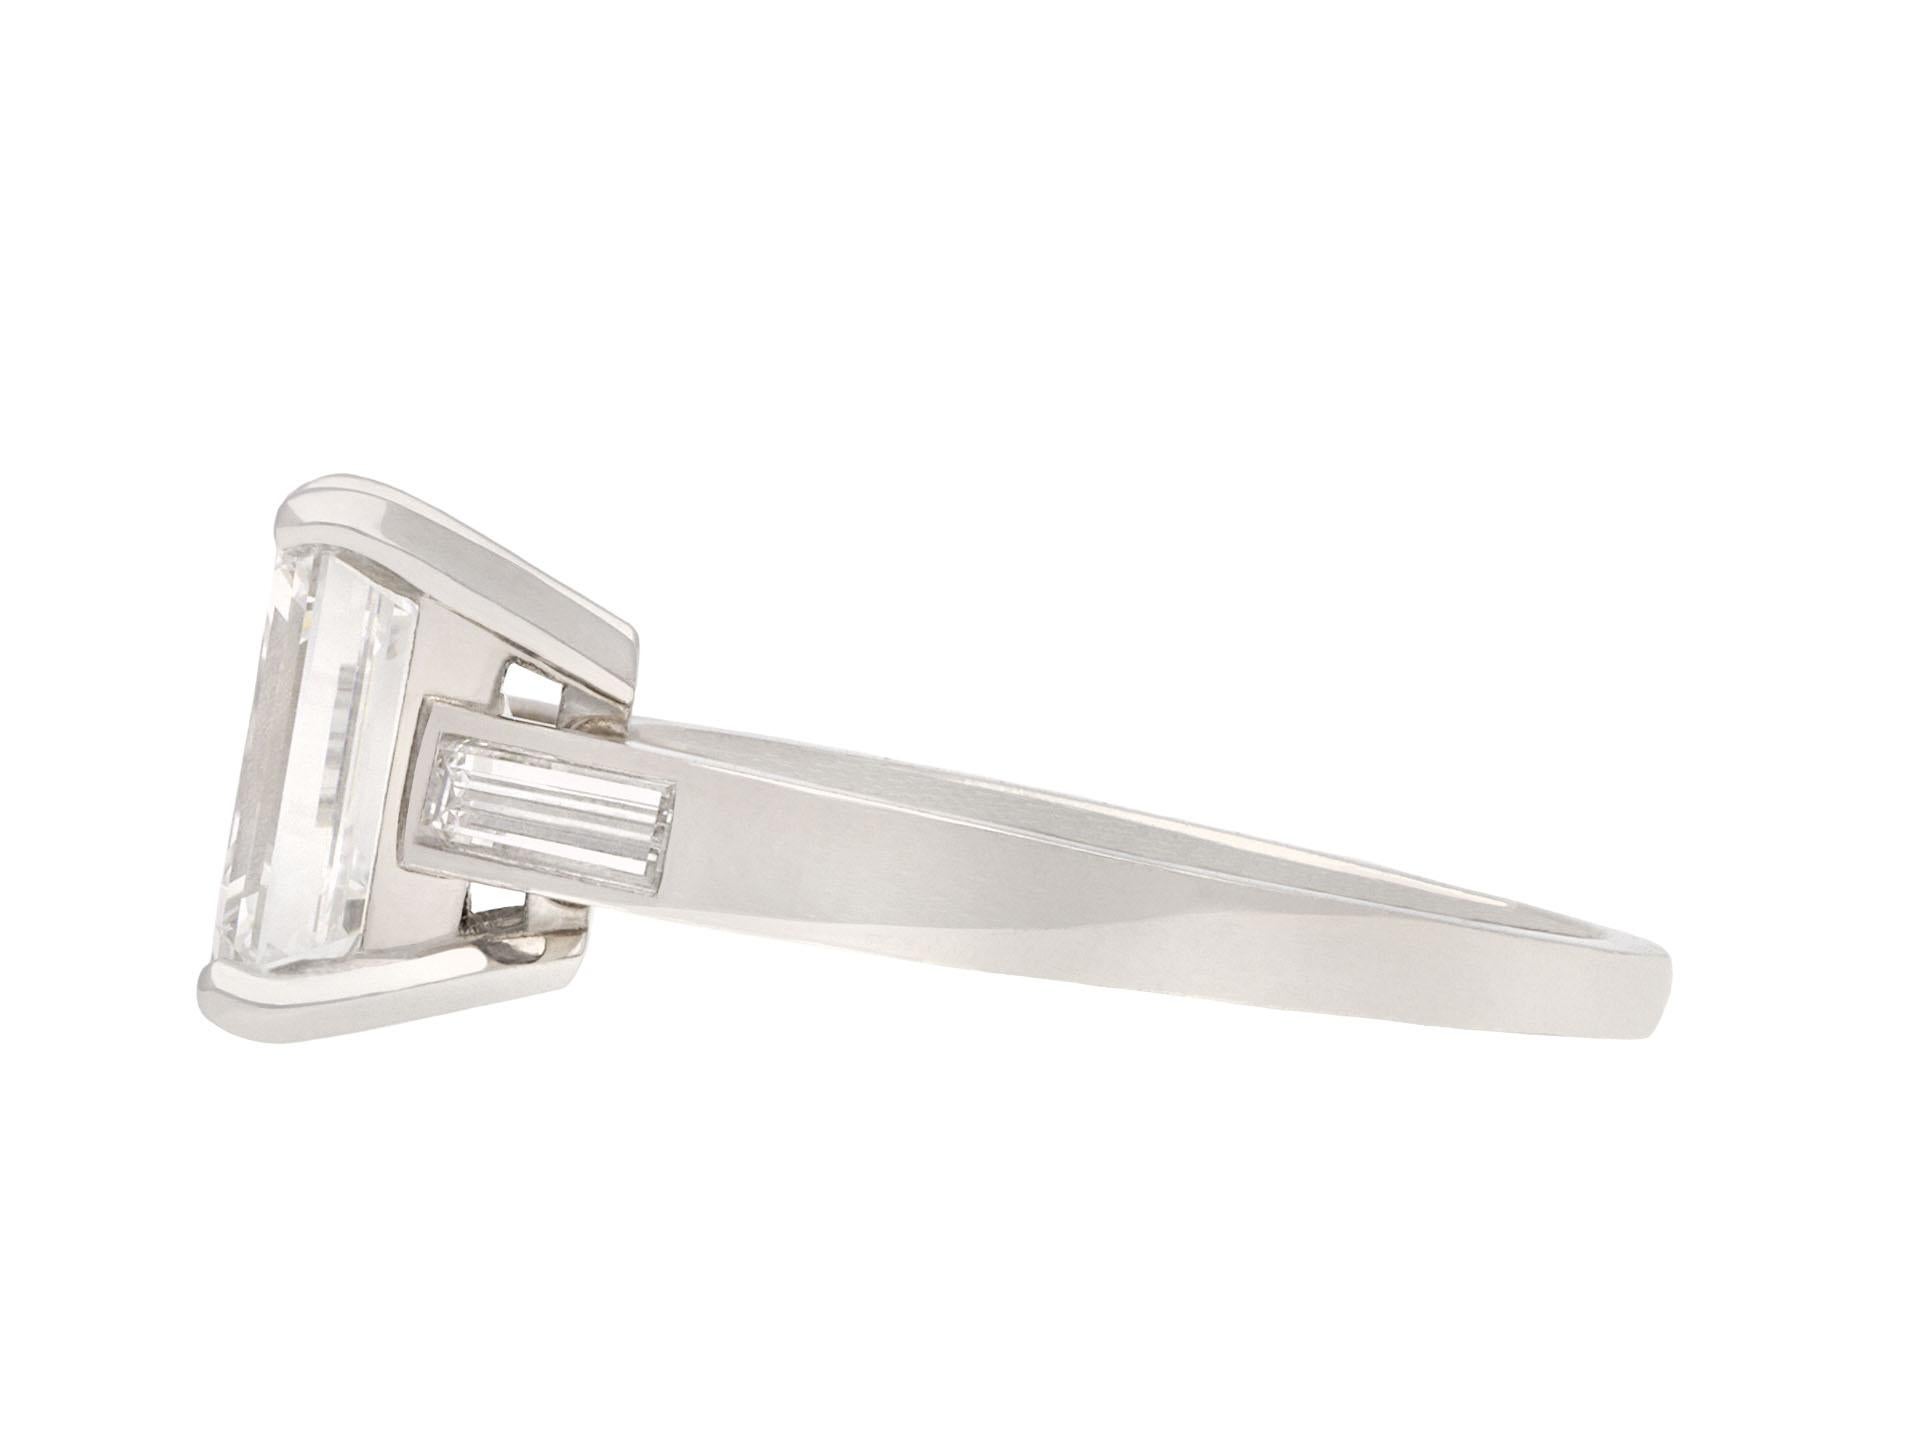 Tiffany & Co. diamond flanked solitaire ring. Set to centre with an emerald-cut diamond, E colour, VVS1 clarity, with a weight of 2.01 carats in an open back claw setting, flanked by two rectangular baguette cut diamonds in open back rubover